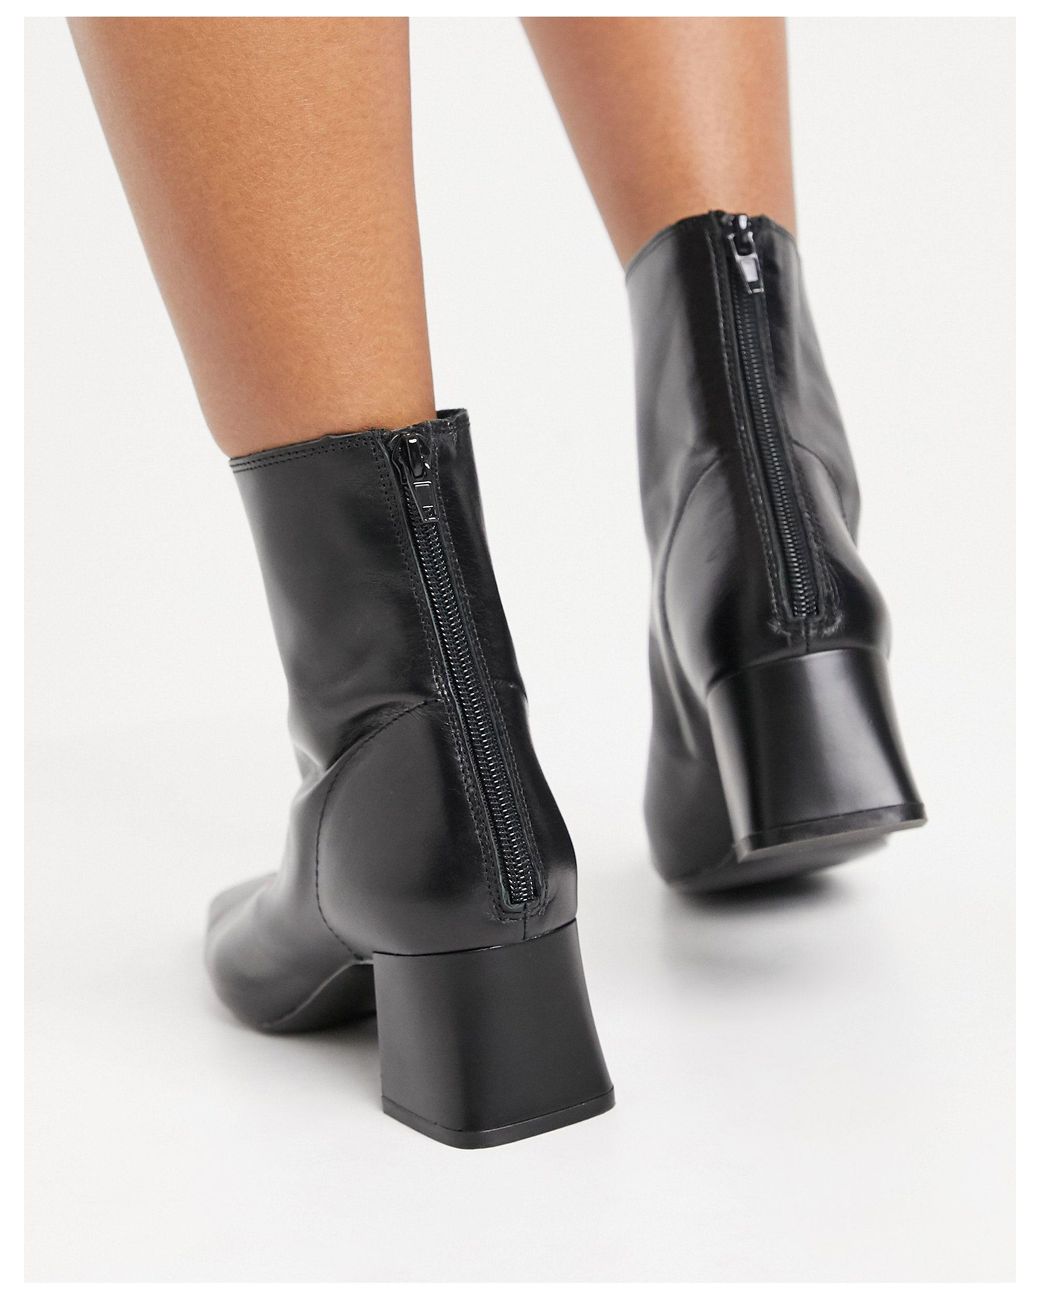 Mango Leather Mid Heel Boots in Black | Lyst